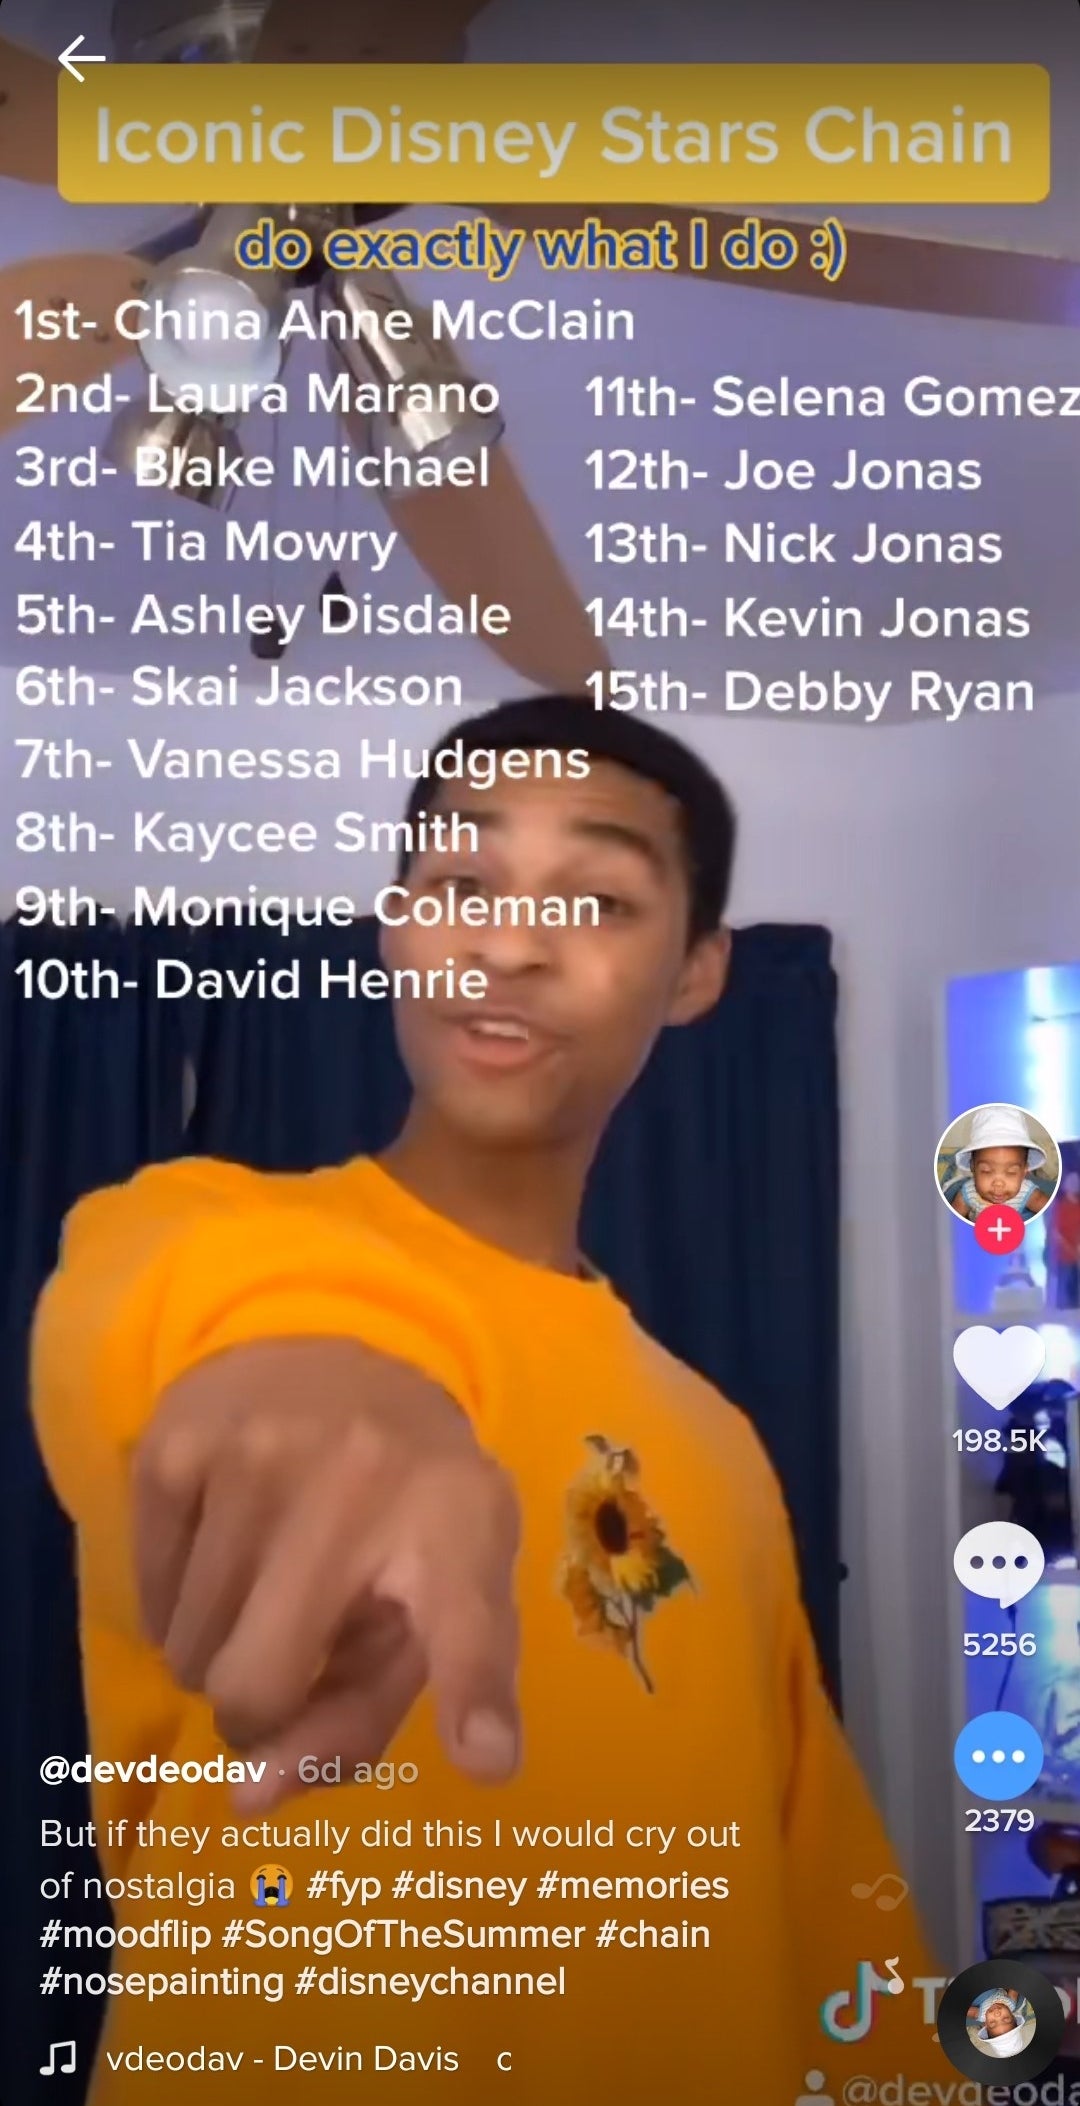 In his video, the TikToker includes a numbered list of 15 iconic Disney stars to participate in the challenge